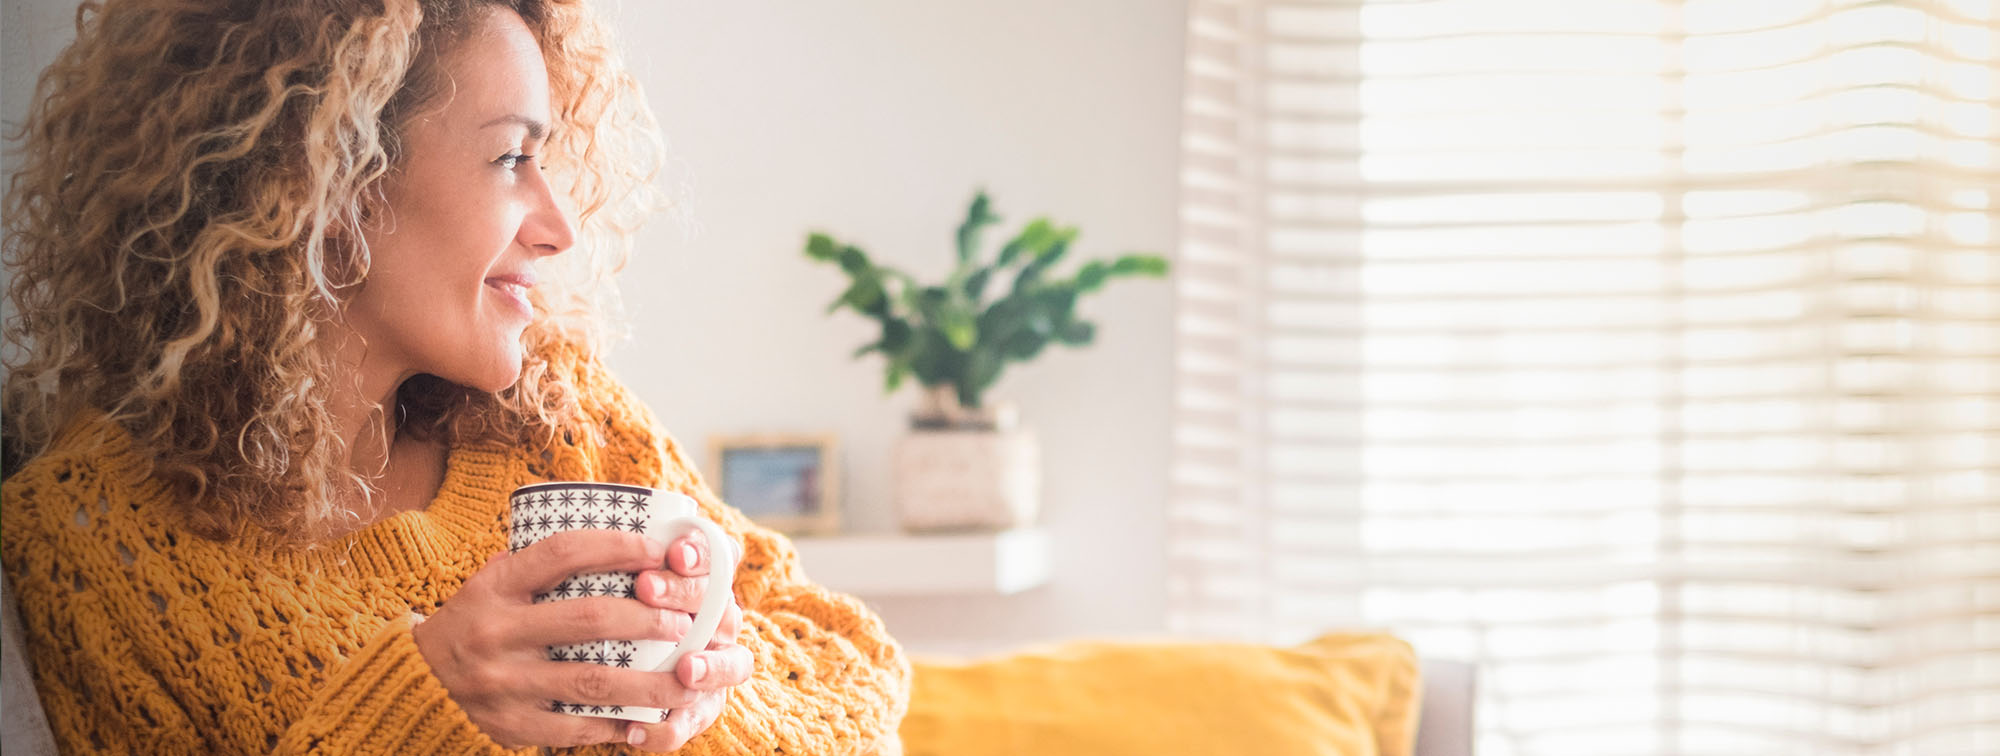 Woman enjoying a cup of coffee at home